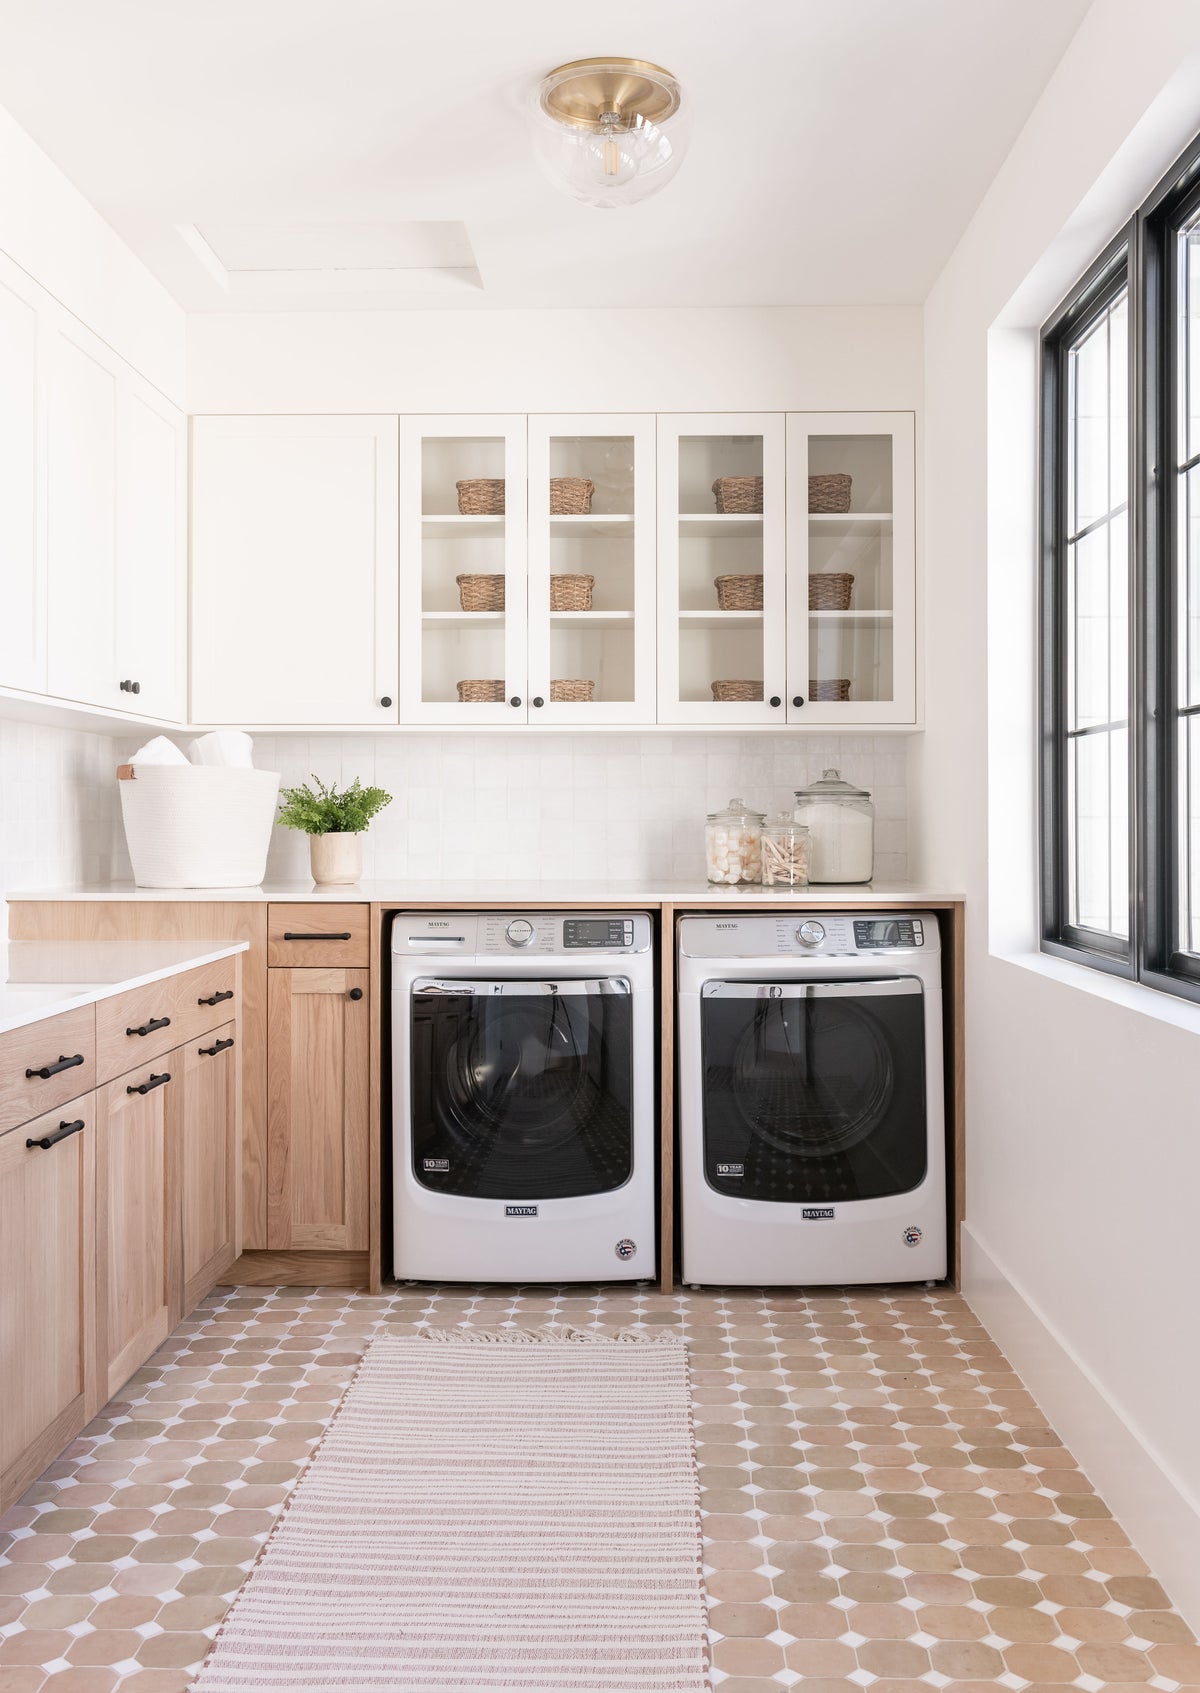 A soft neutral beigy-pink tile floor in a laundry room.